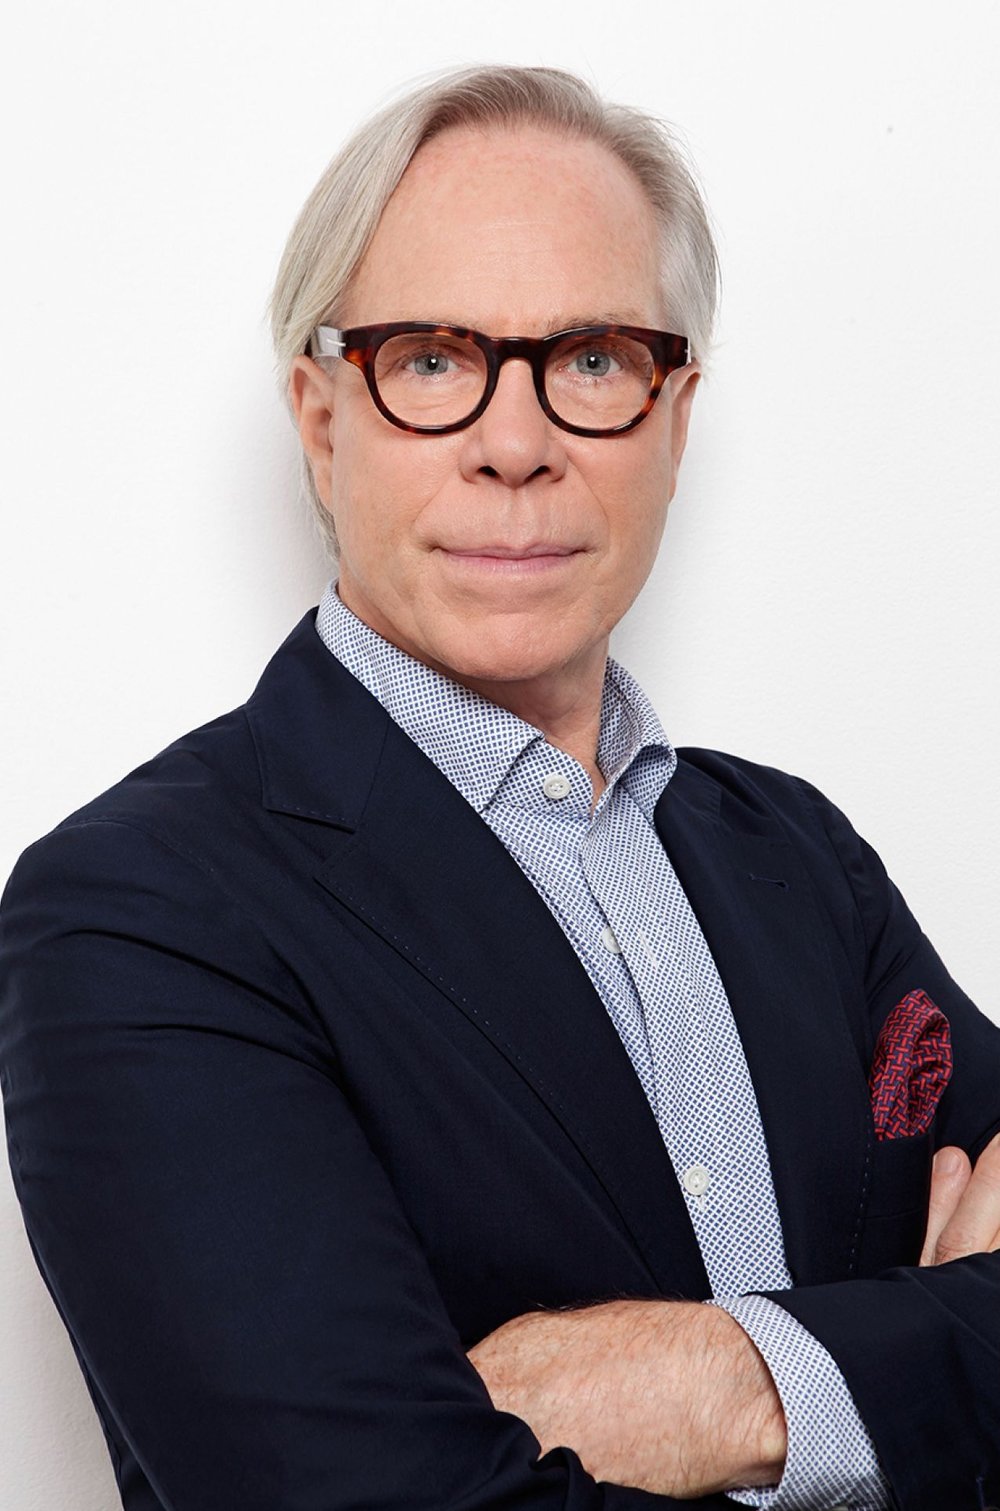 Villain Mand Hykler Style Interview: Tommy Hilfiger is the American Dream — David RS Taylor